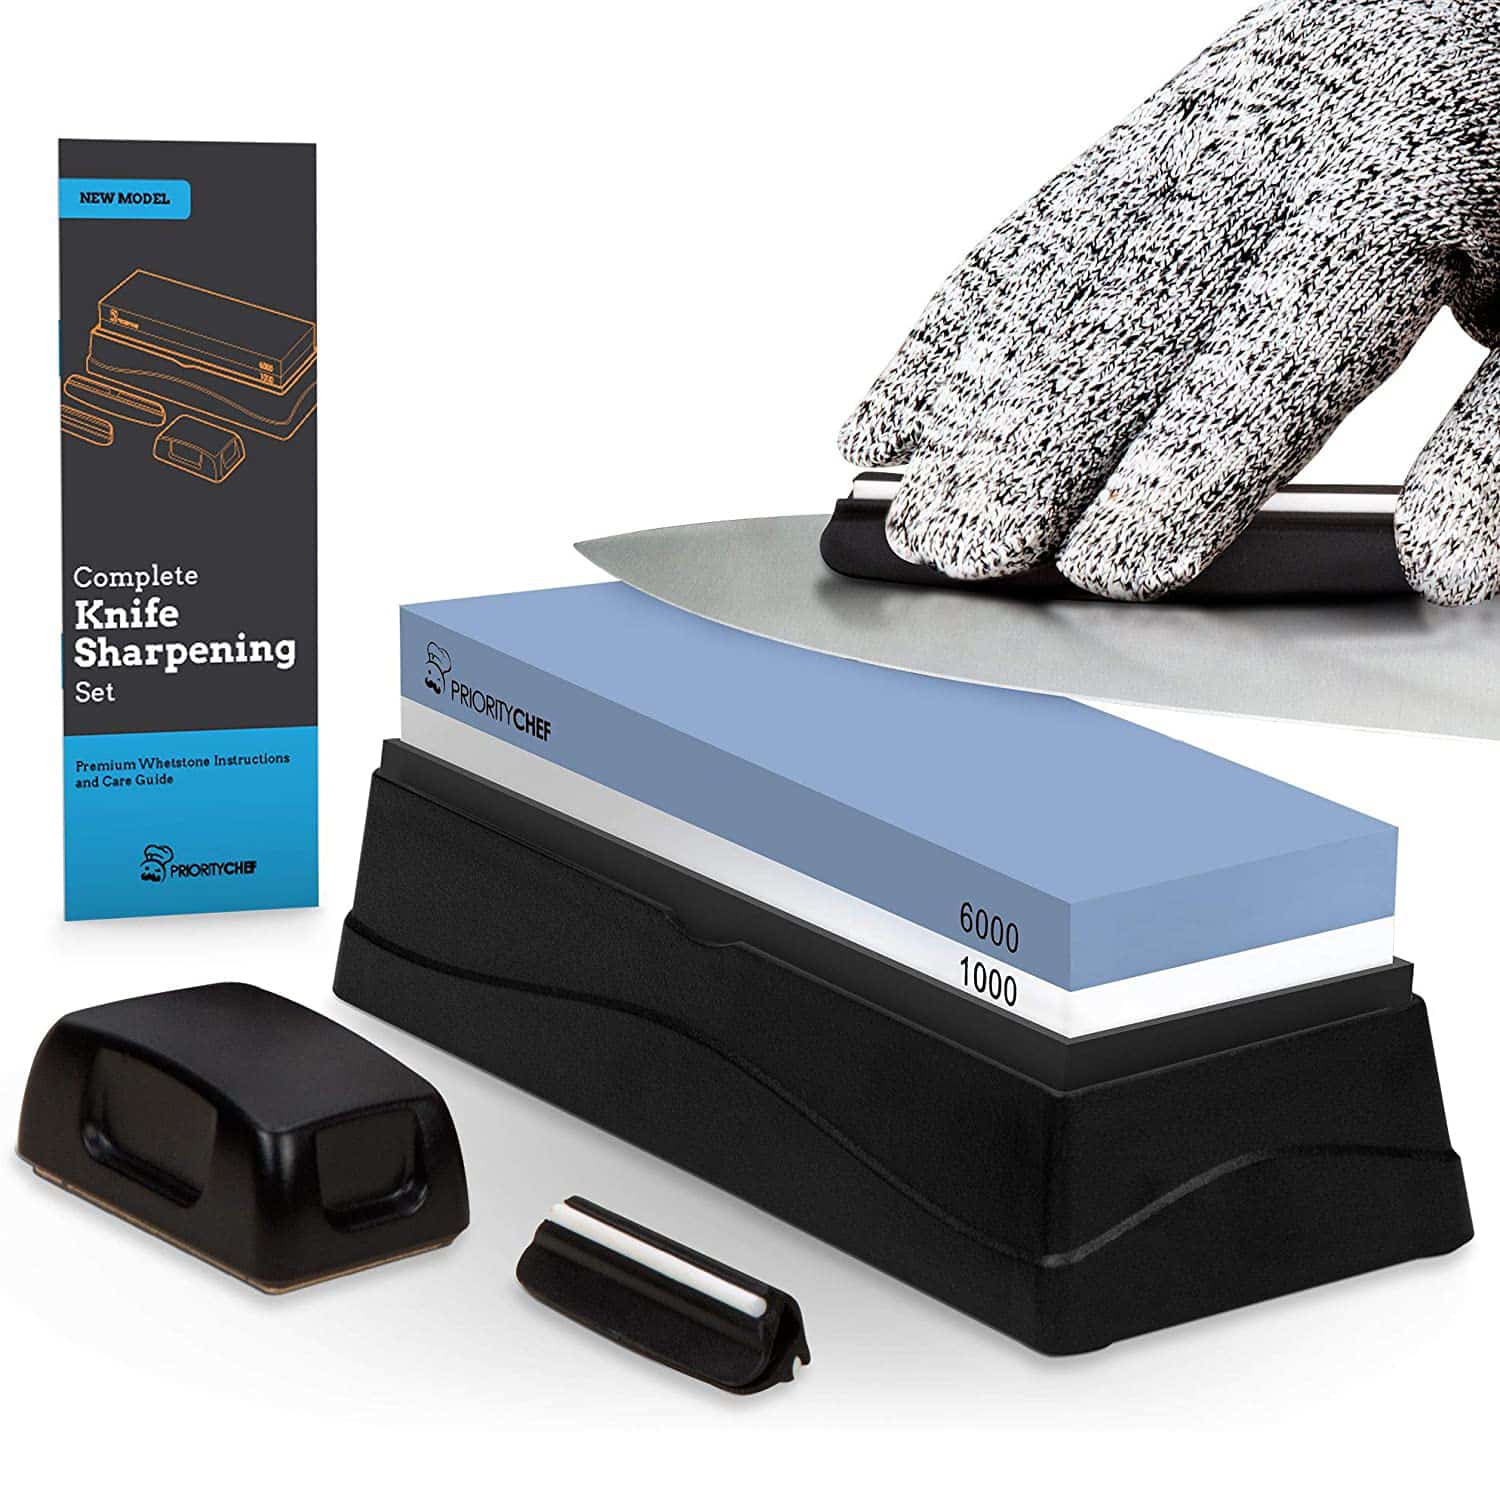 Top 10 Best Knife Sharpening Stones in 2021 Reviews